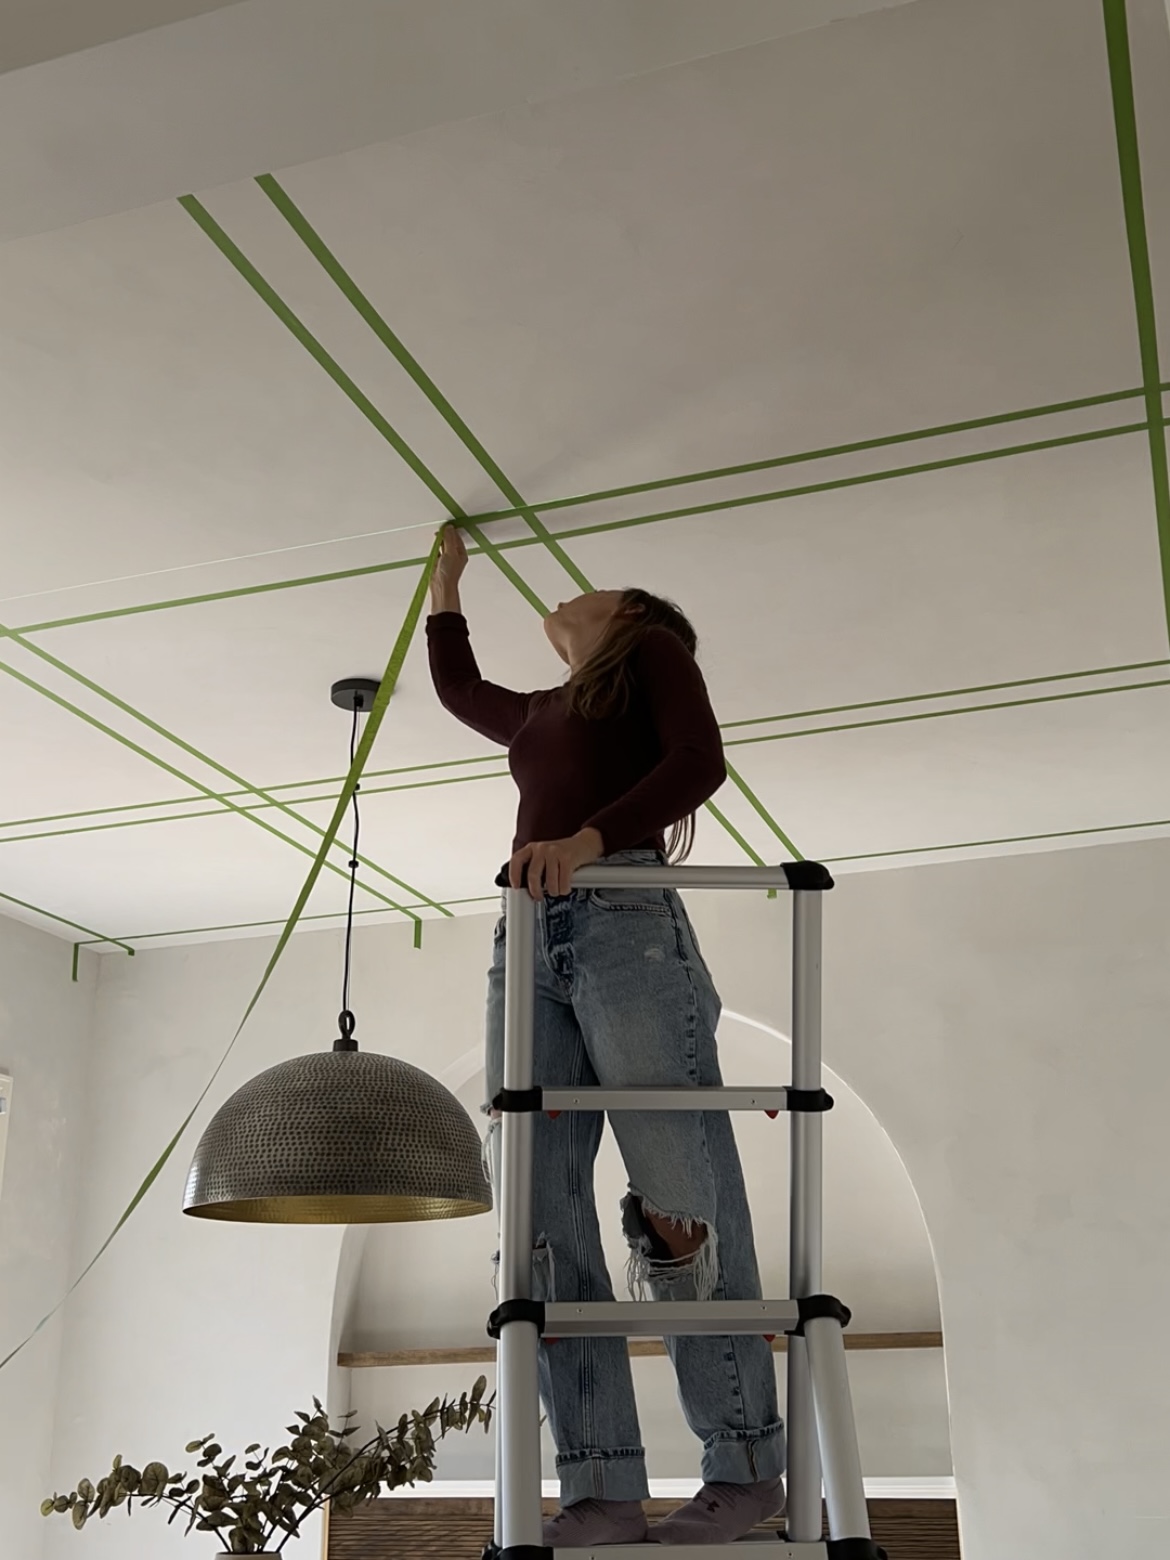 Woman on a ladder taping lines on a ceiling.